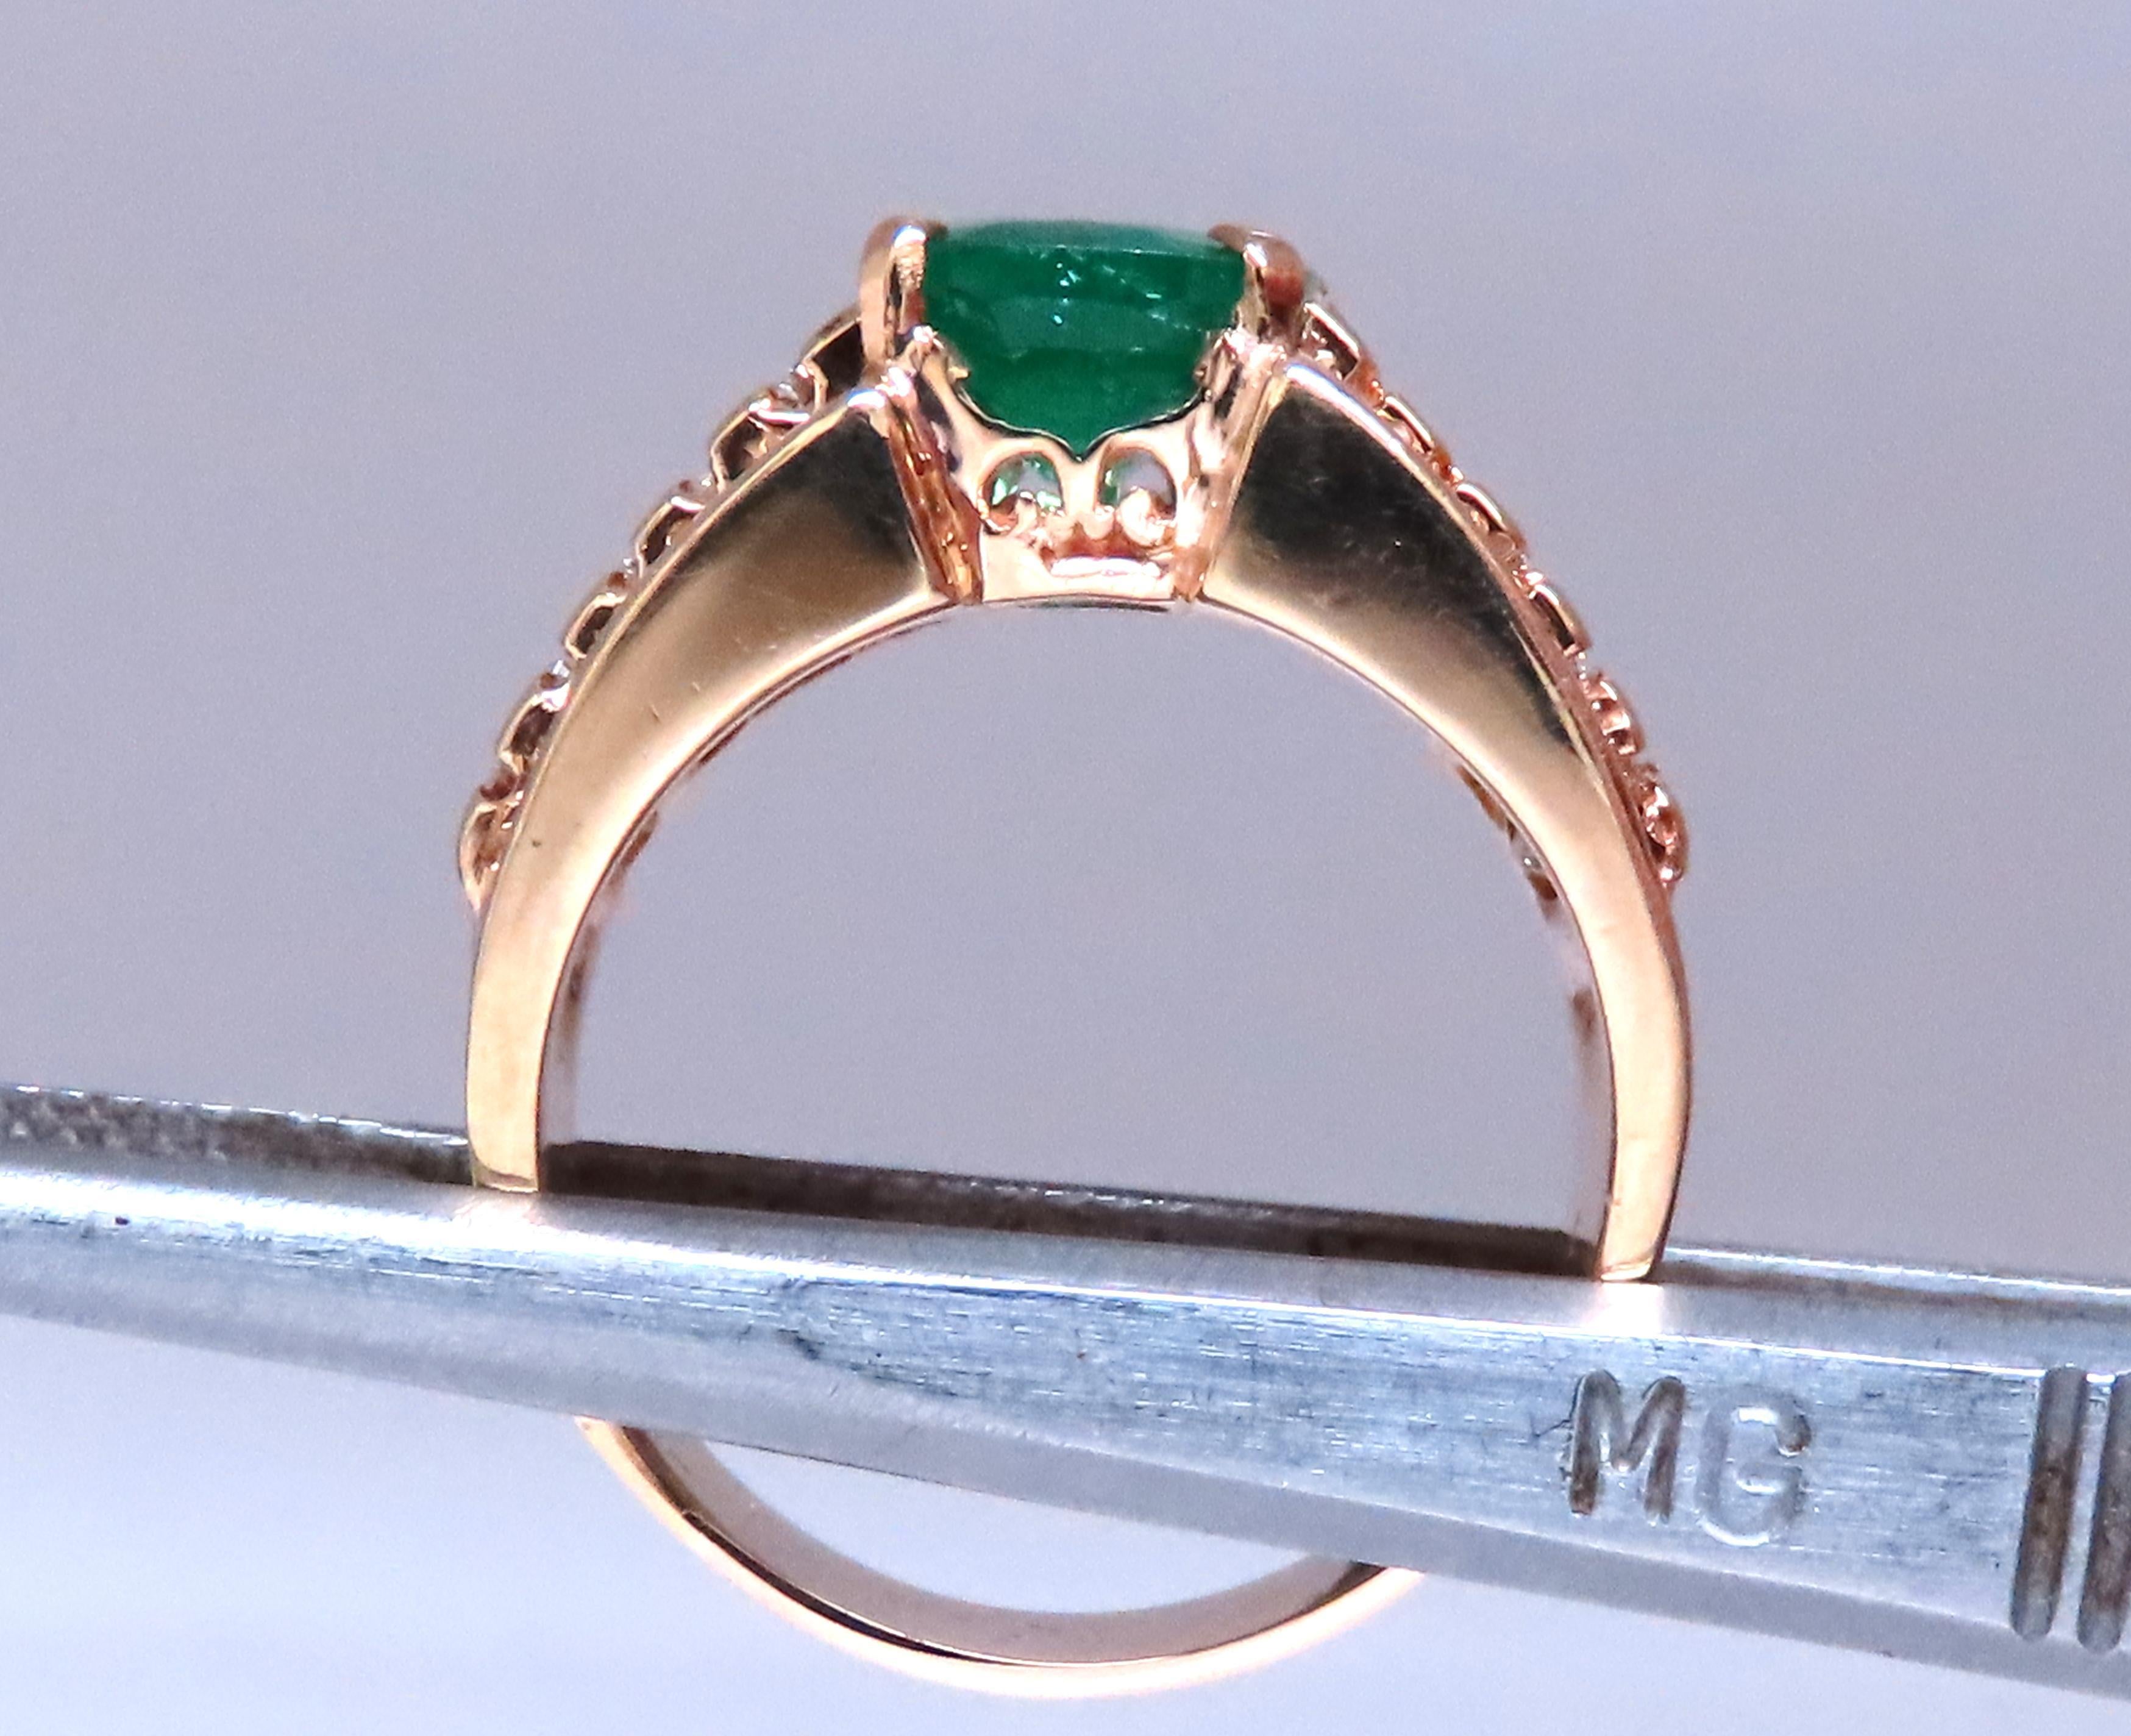 Women's GIA Certified 3.01ct Natural Emerald Diamonds Ring 14kt Gold 12360 For Sale